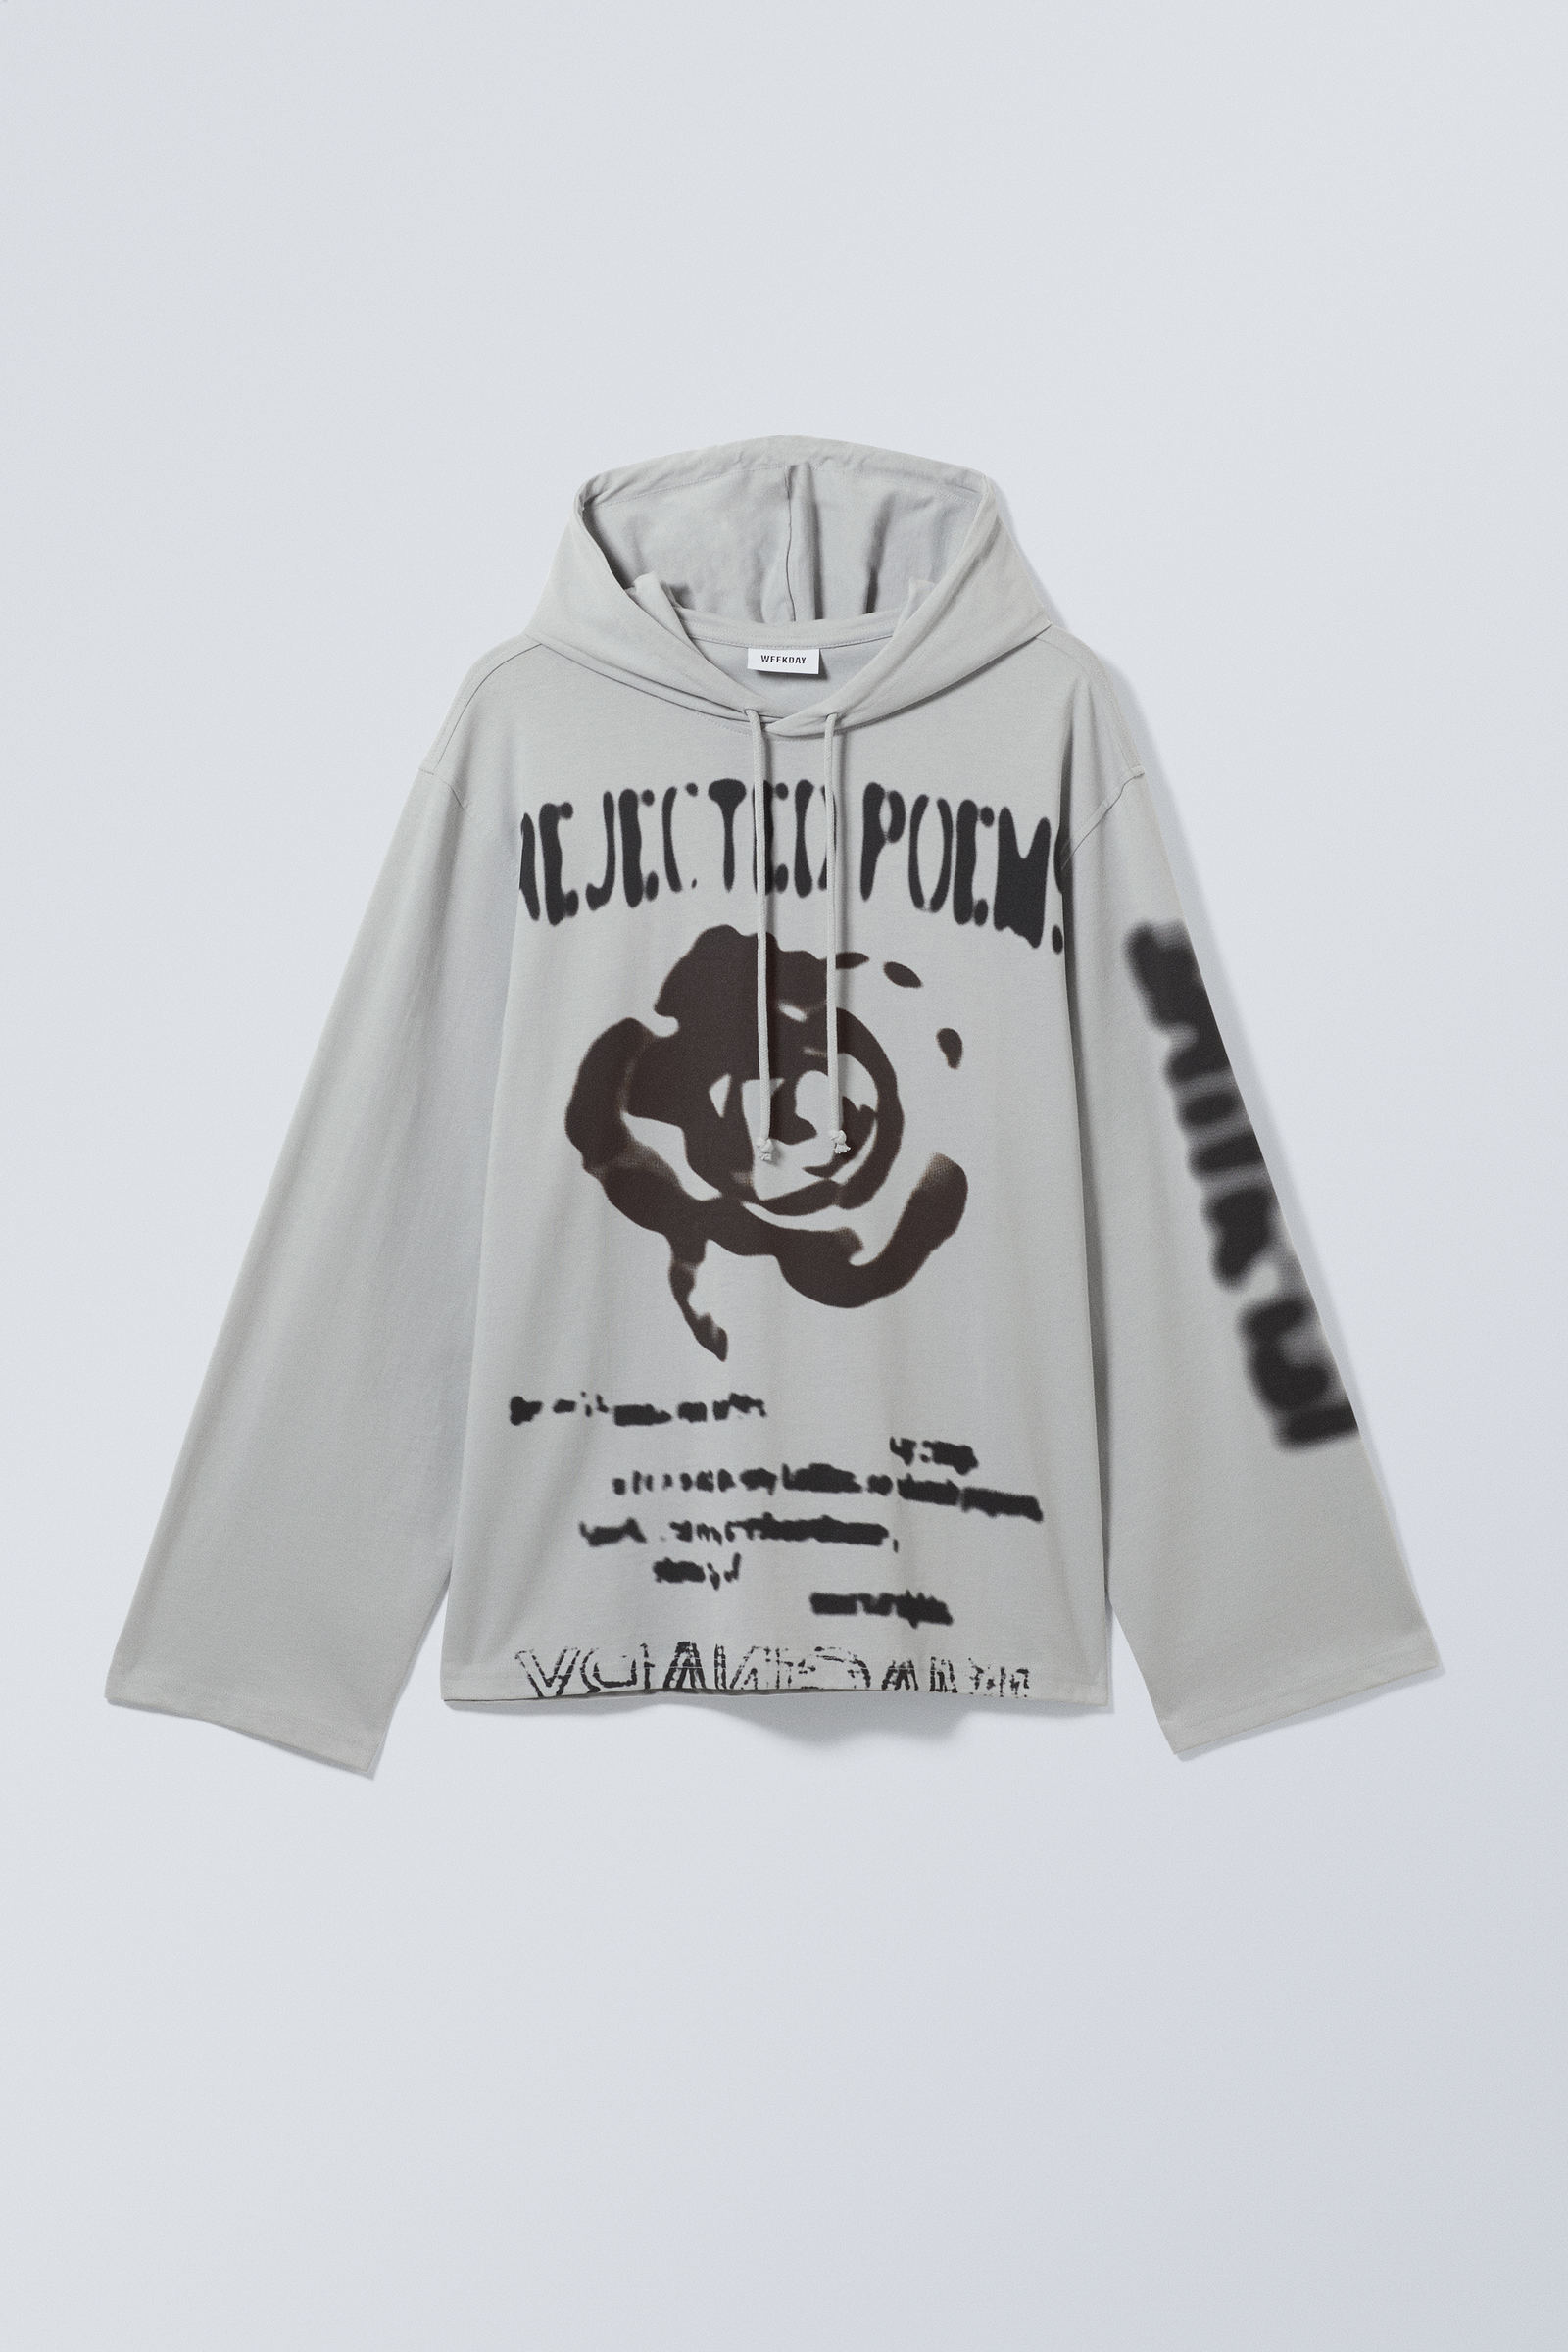 Rejected Poems - Graphic Hoodie - 3